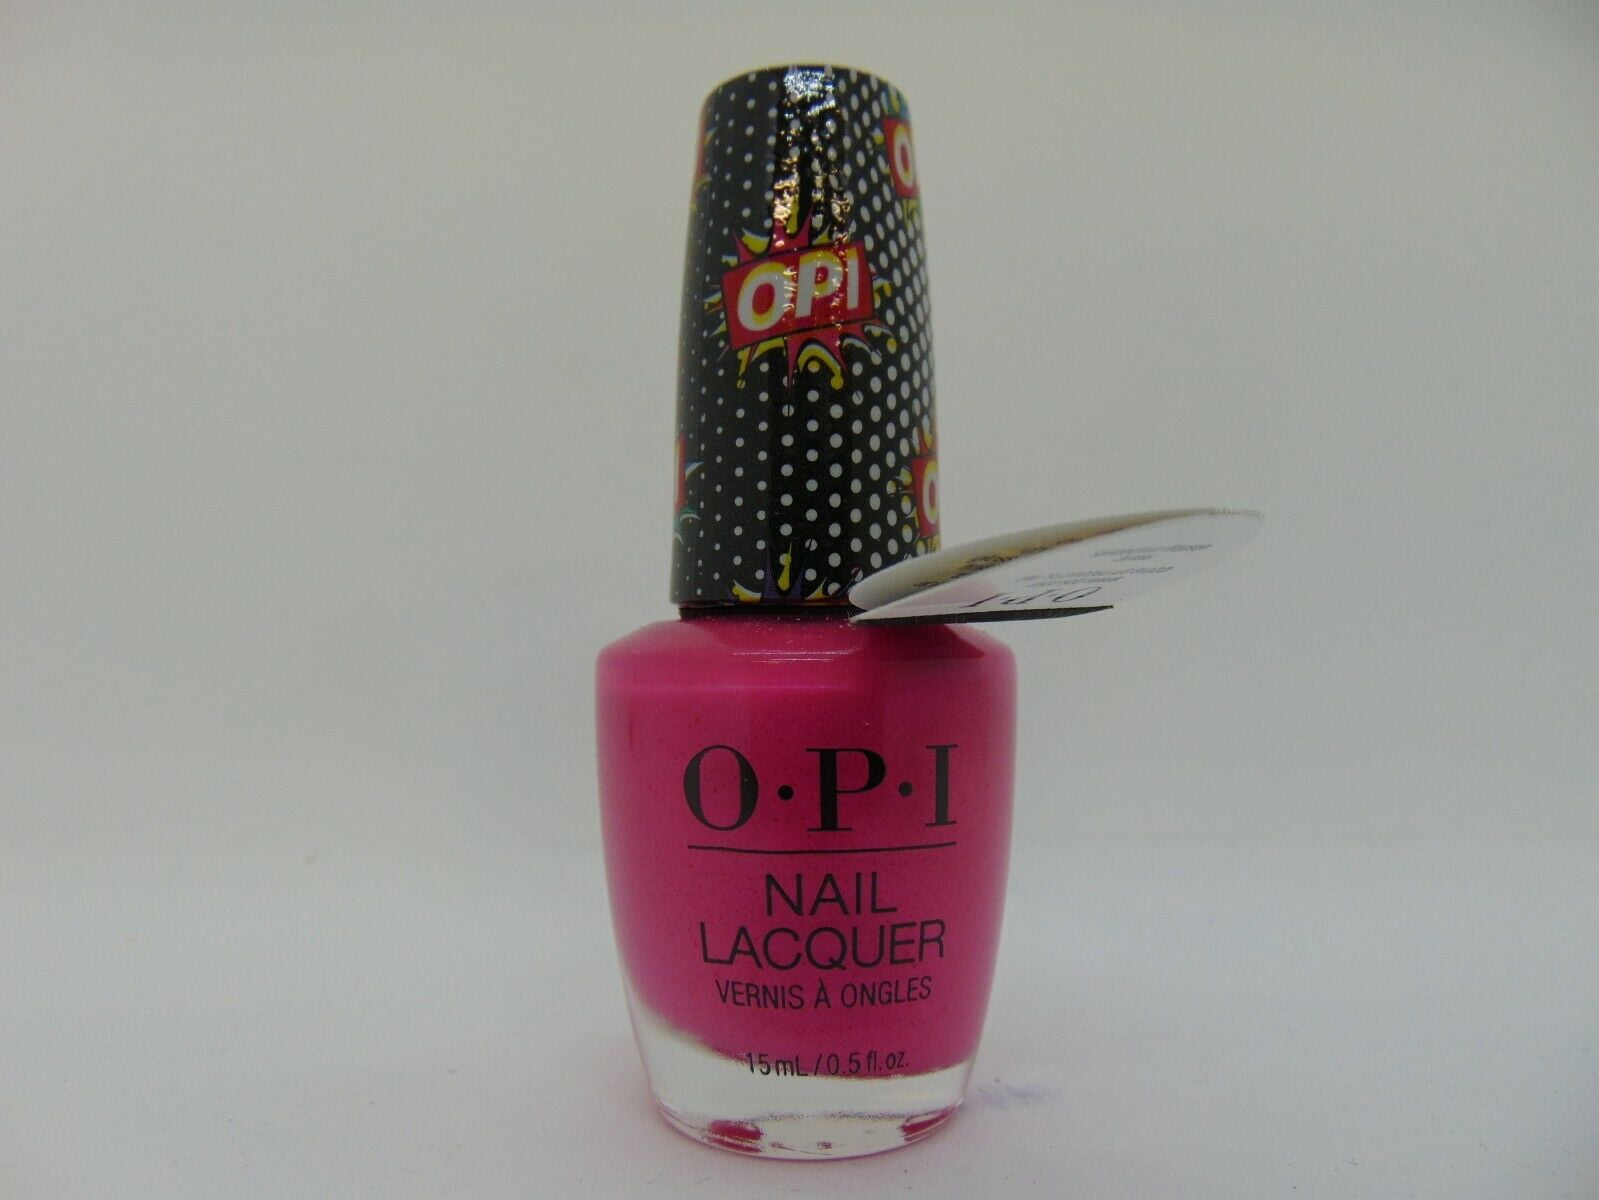 OPI Nail Lacquer in "Palm Springs Pink" - wide 5